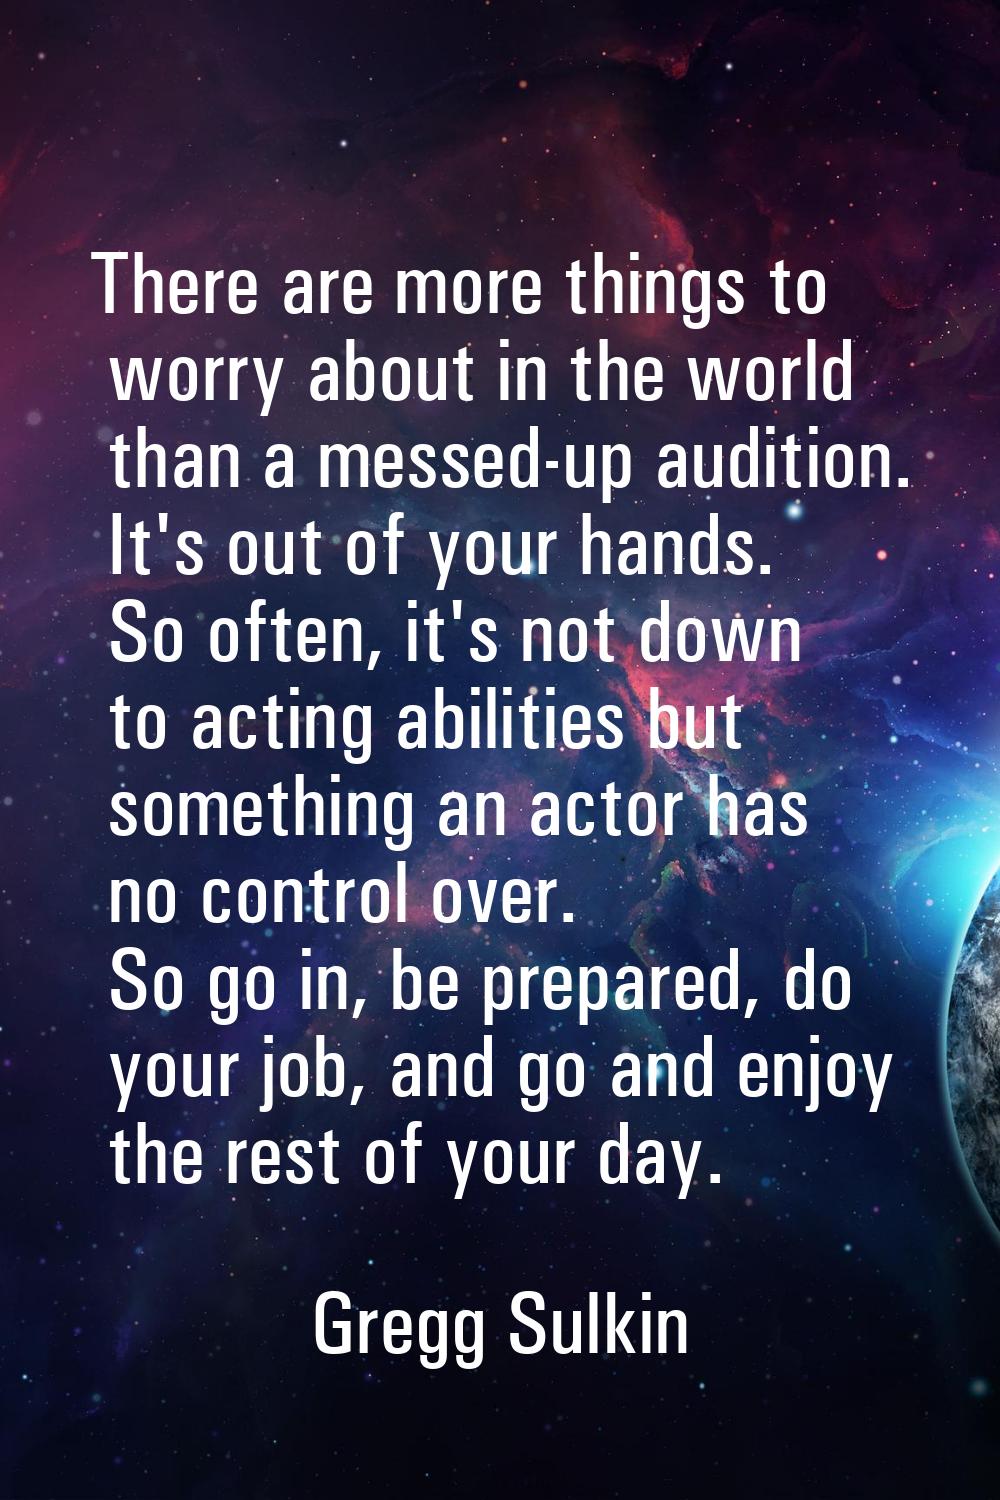 There are more things to worry about in the world than a messed-up audition. It's out of your hands